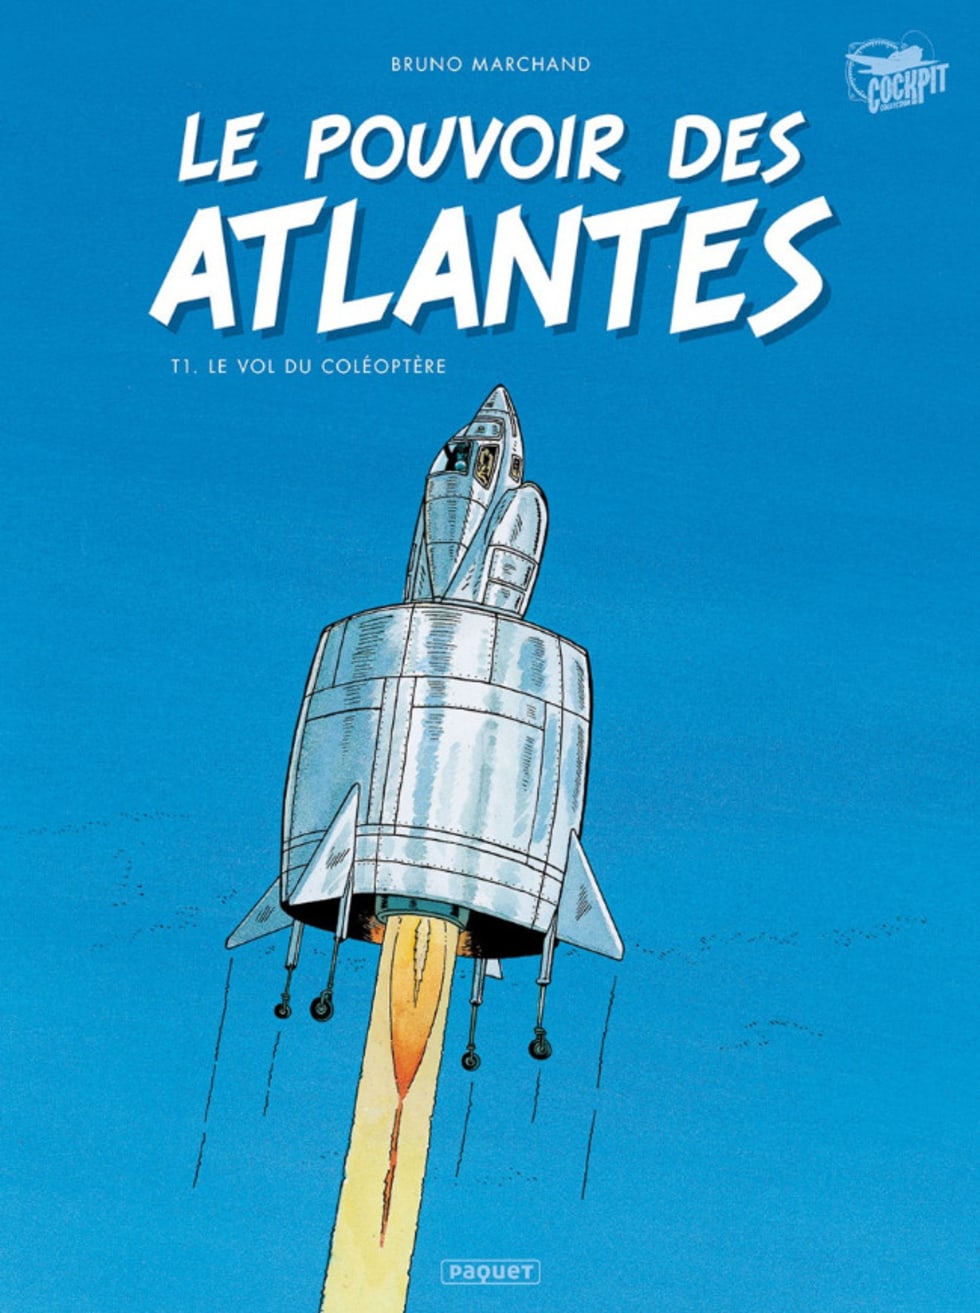 Cover of the Comic Book: “The Power of the Atlanteans – volume 1, The Flight of the Beetle”